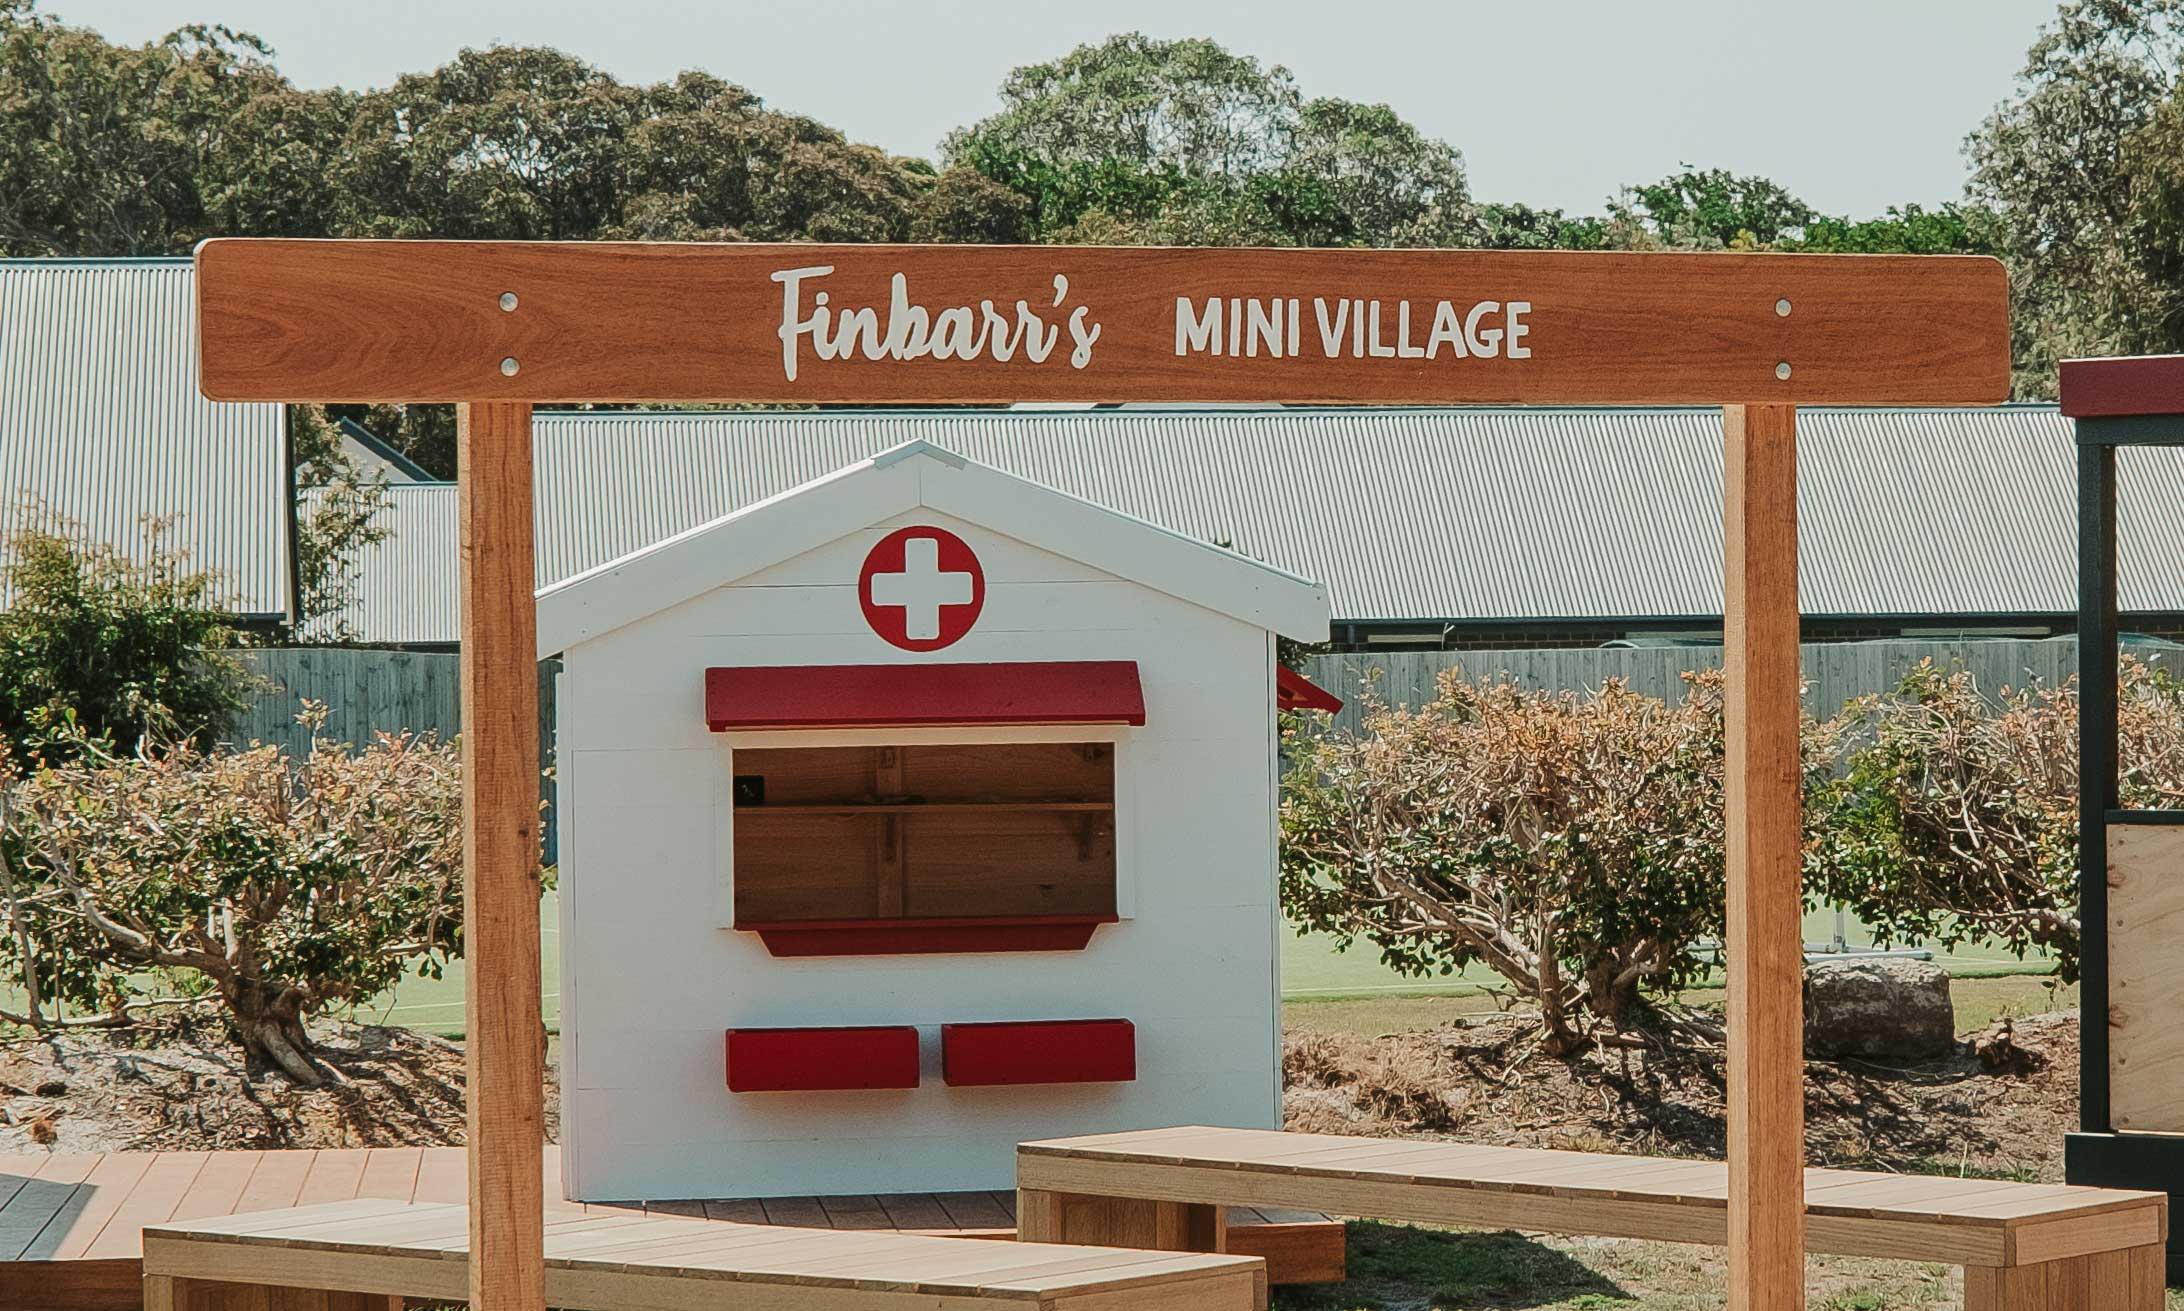 A personalised welcome entry sign for a learning cubby house village, welcome, entry signage